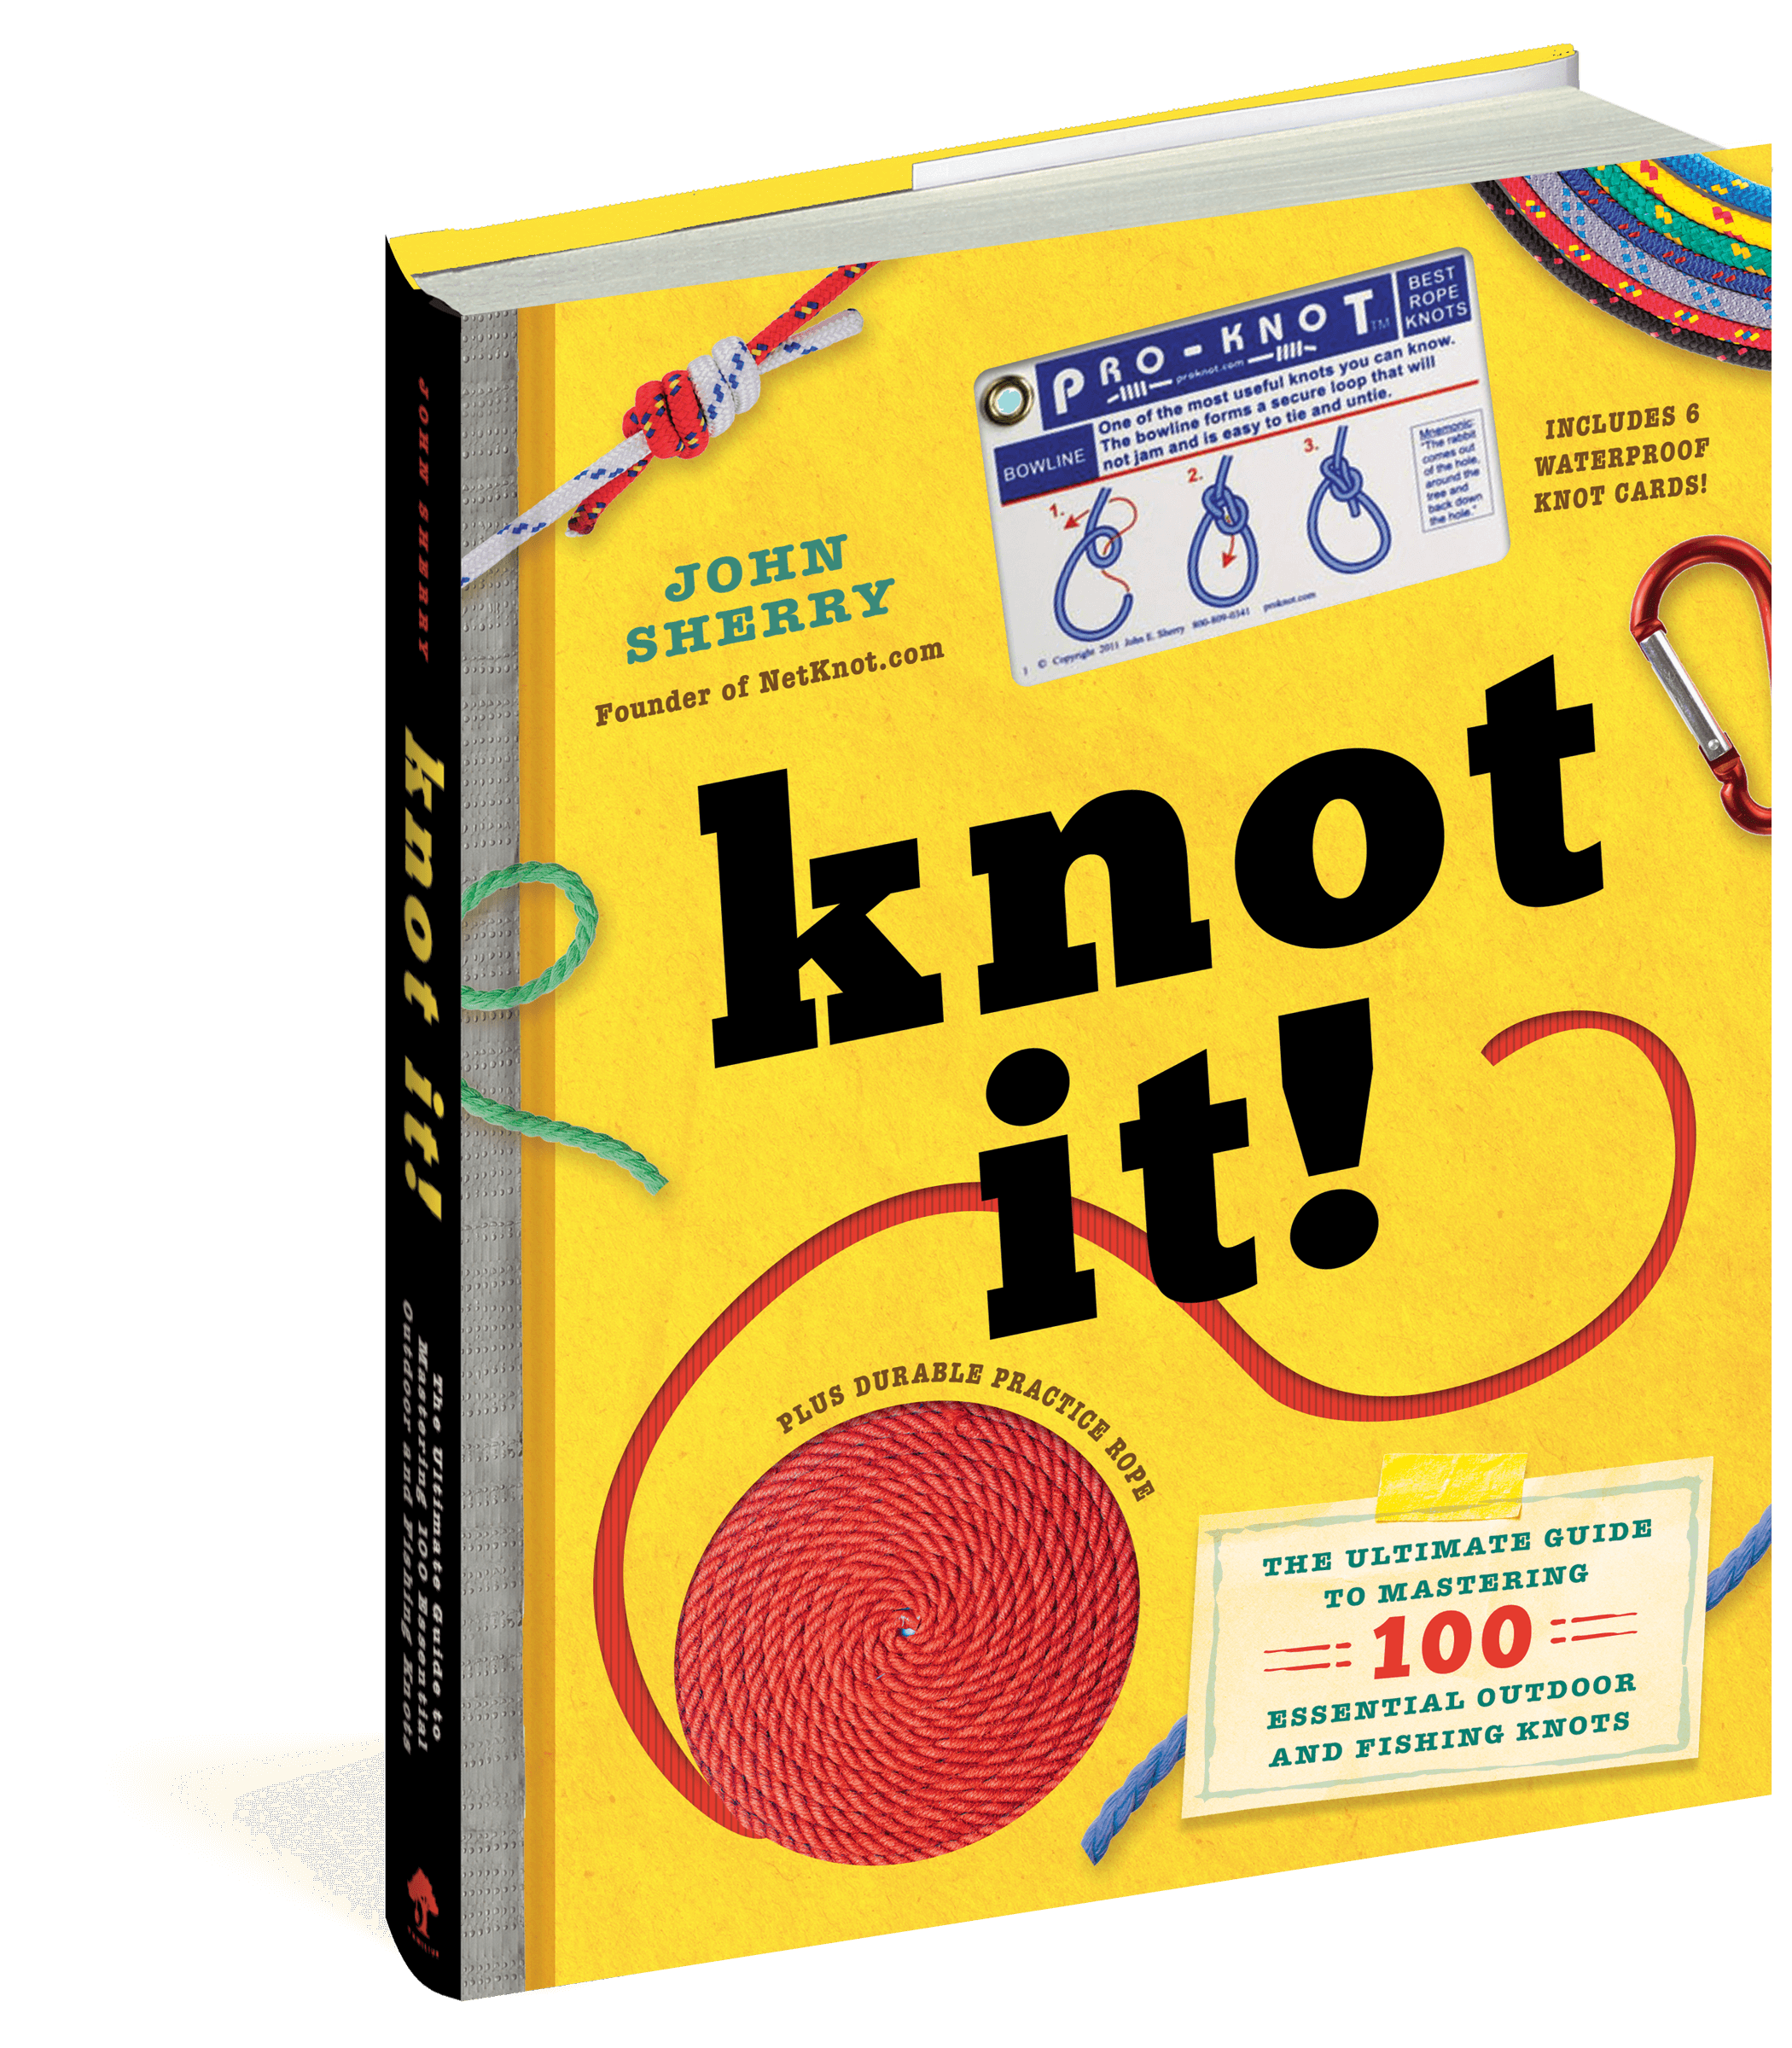 The cover of the book Knot It.